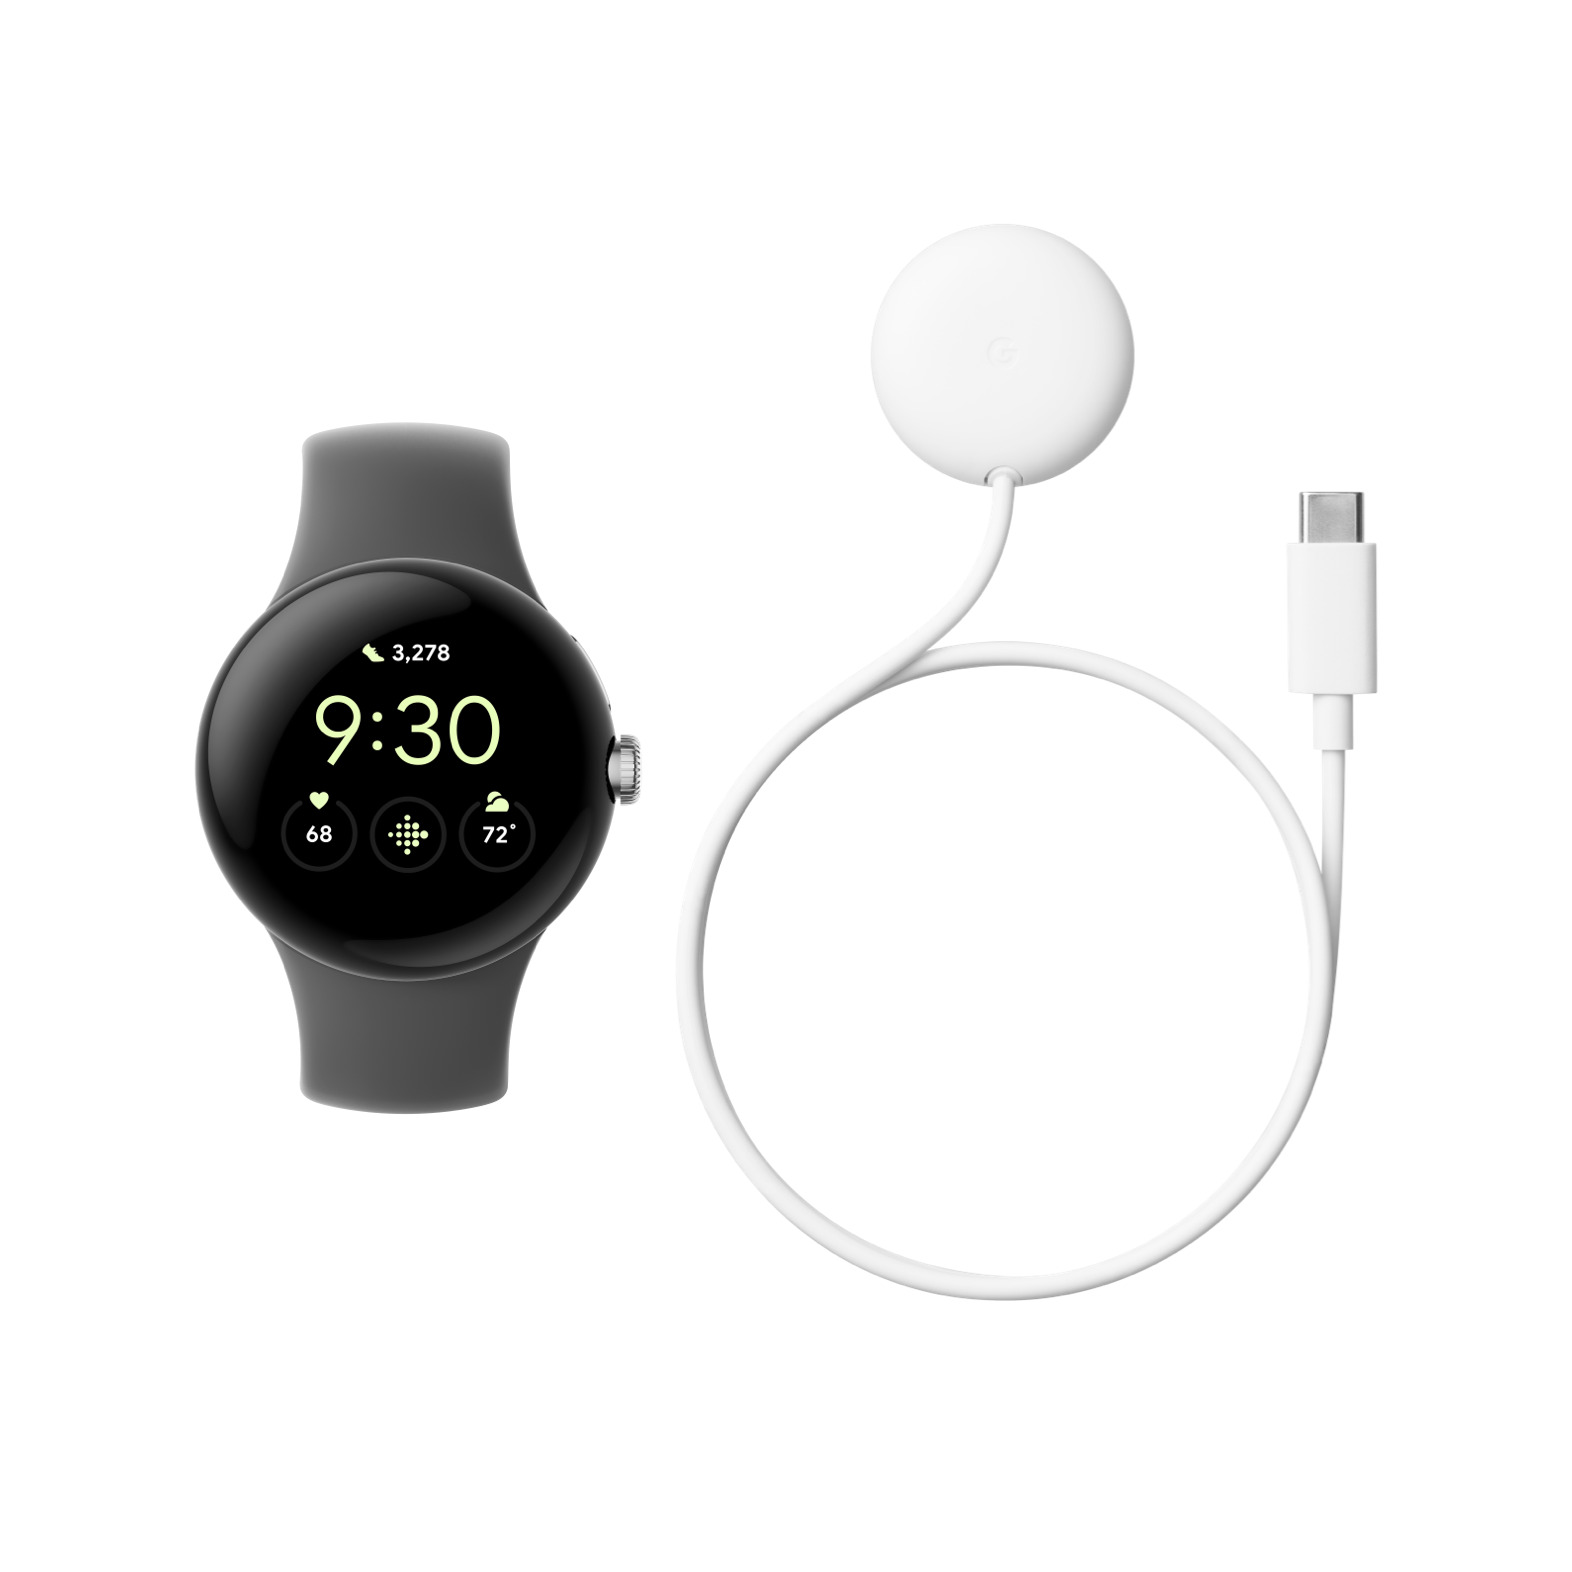 does-the-google-pixel-watch-come-with-a-charger